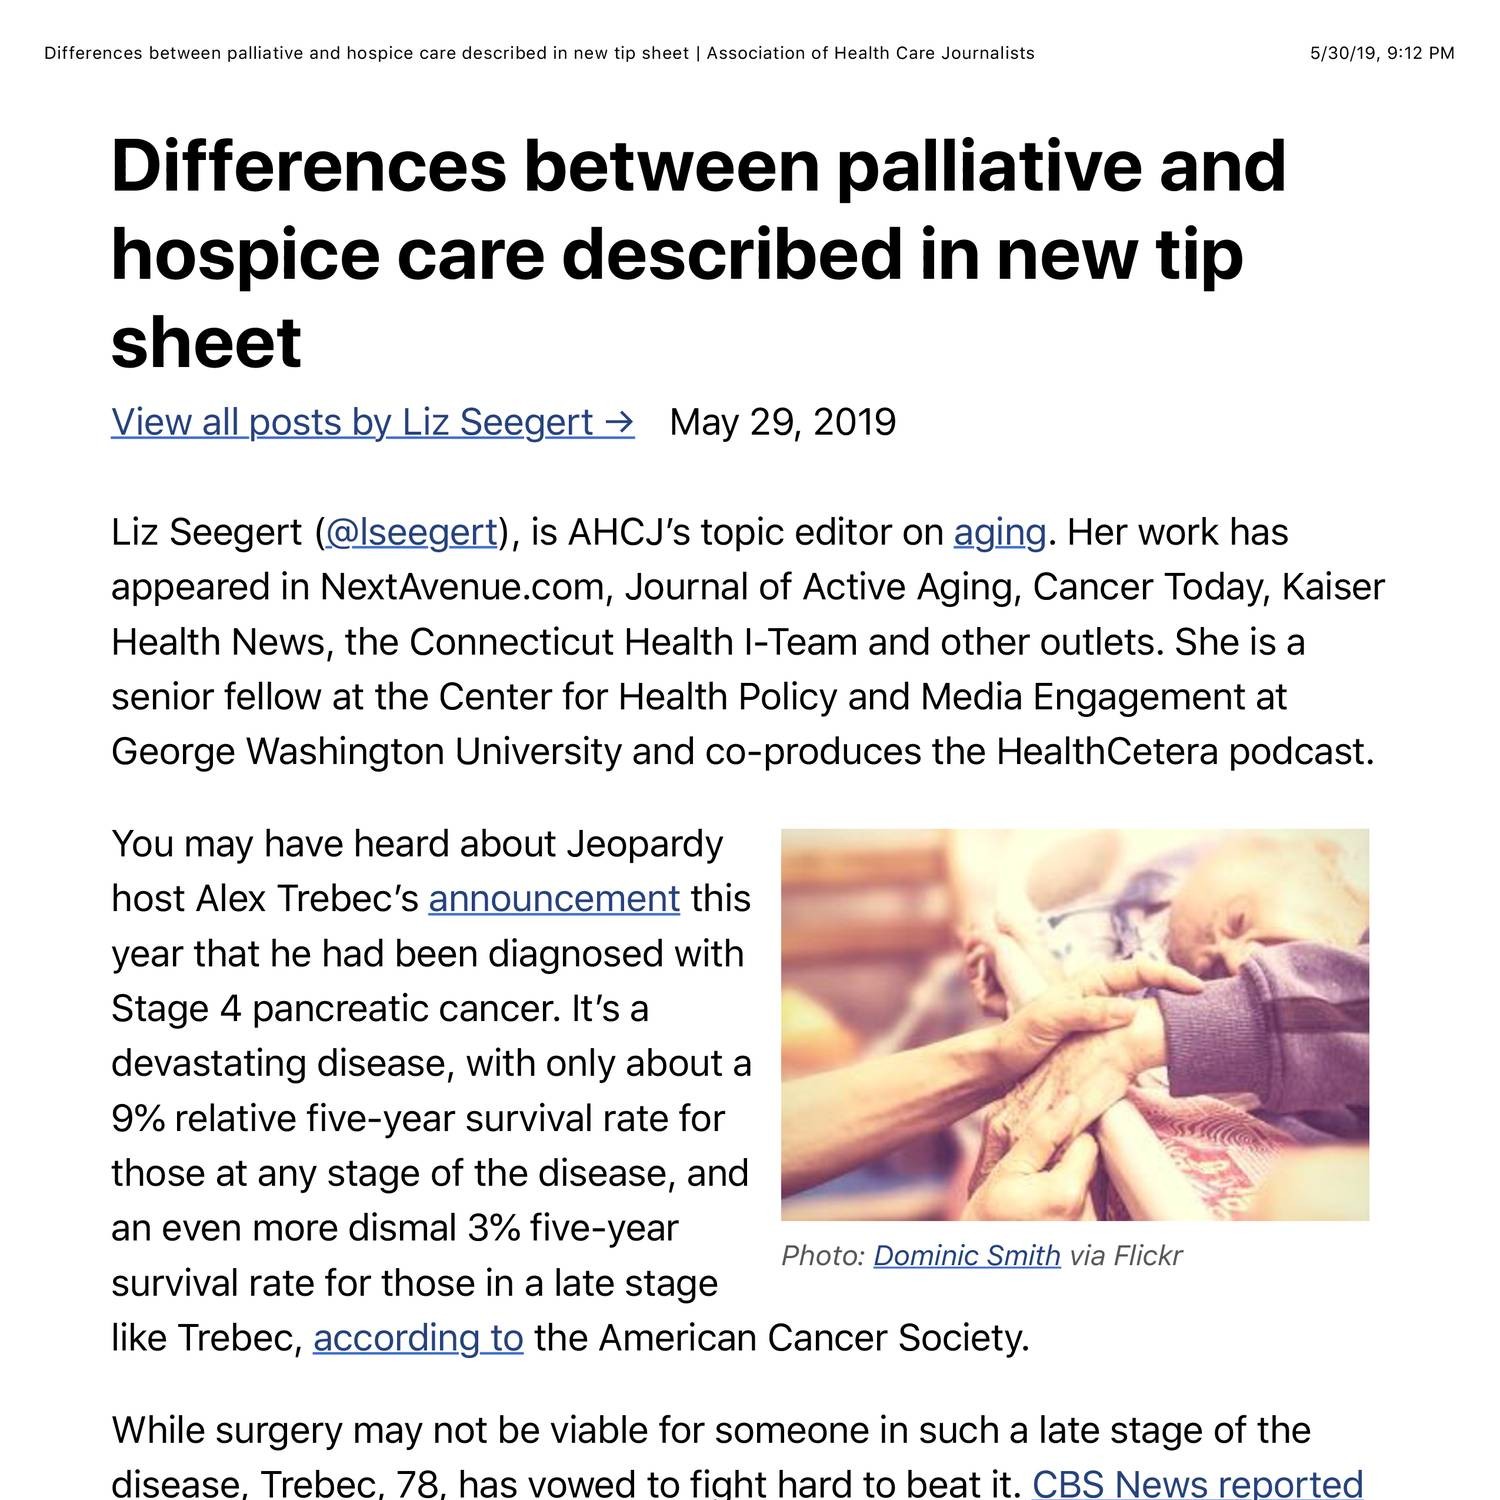 Blog_Palliative Care_Association of Health Care Journalists_Differences